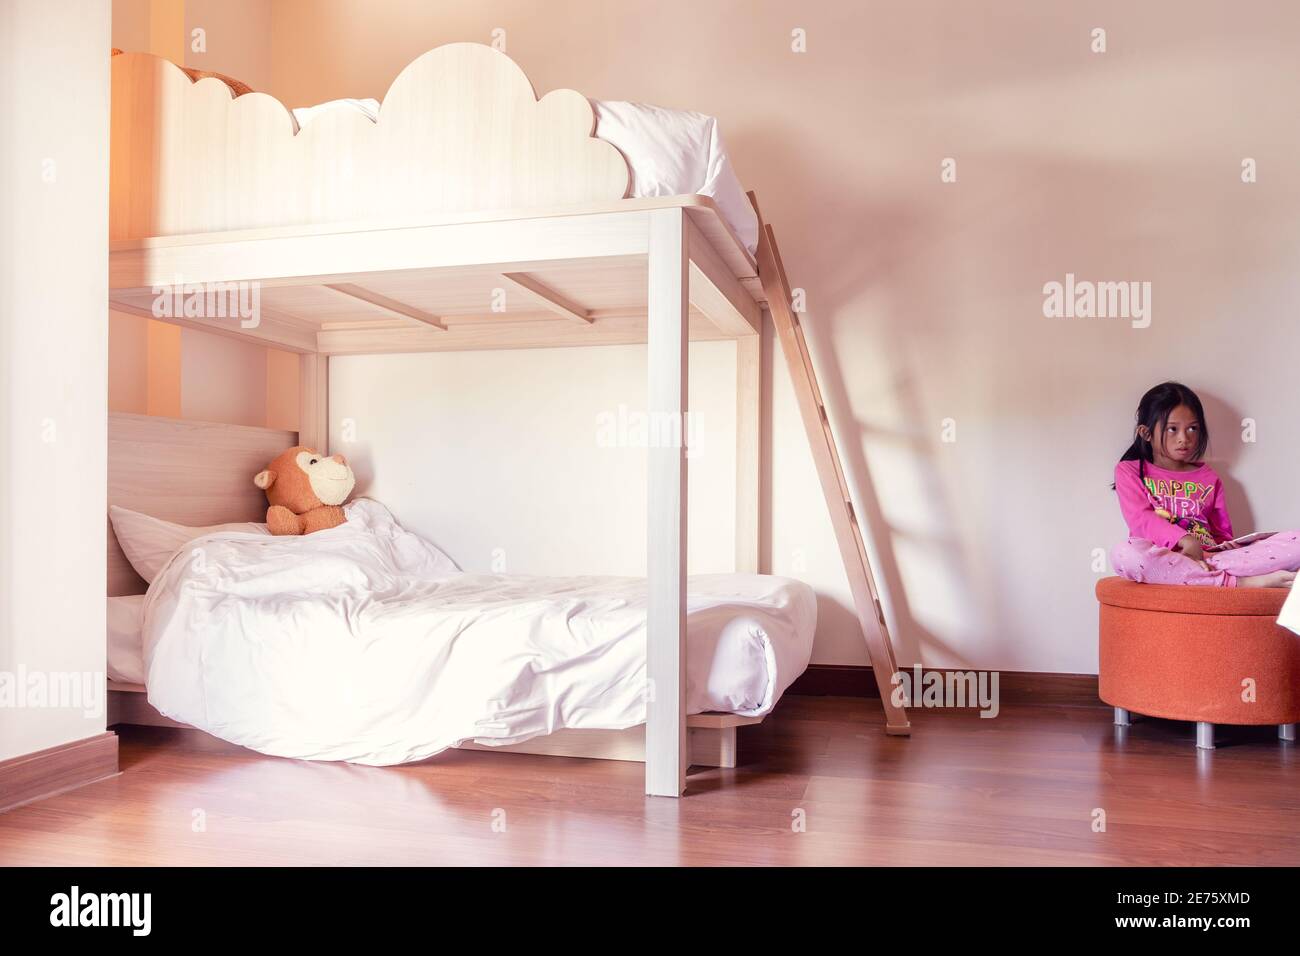 Two-story children's beds in the bedroom, A girl sitting on a stool Stock Photo